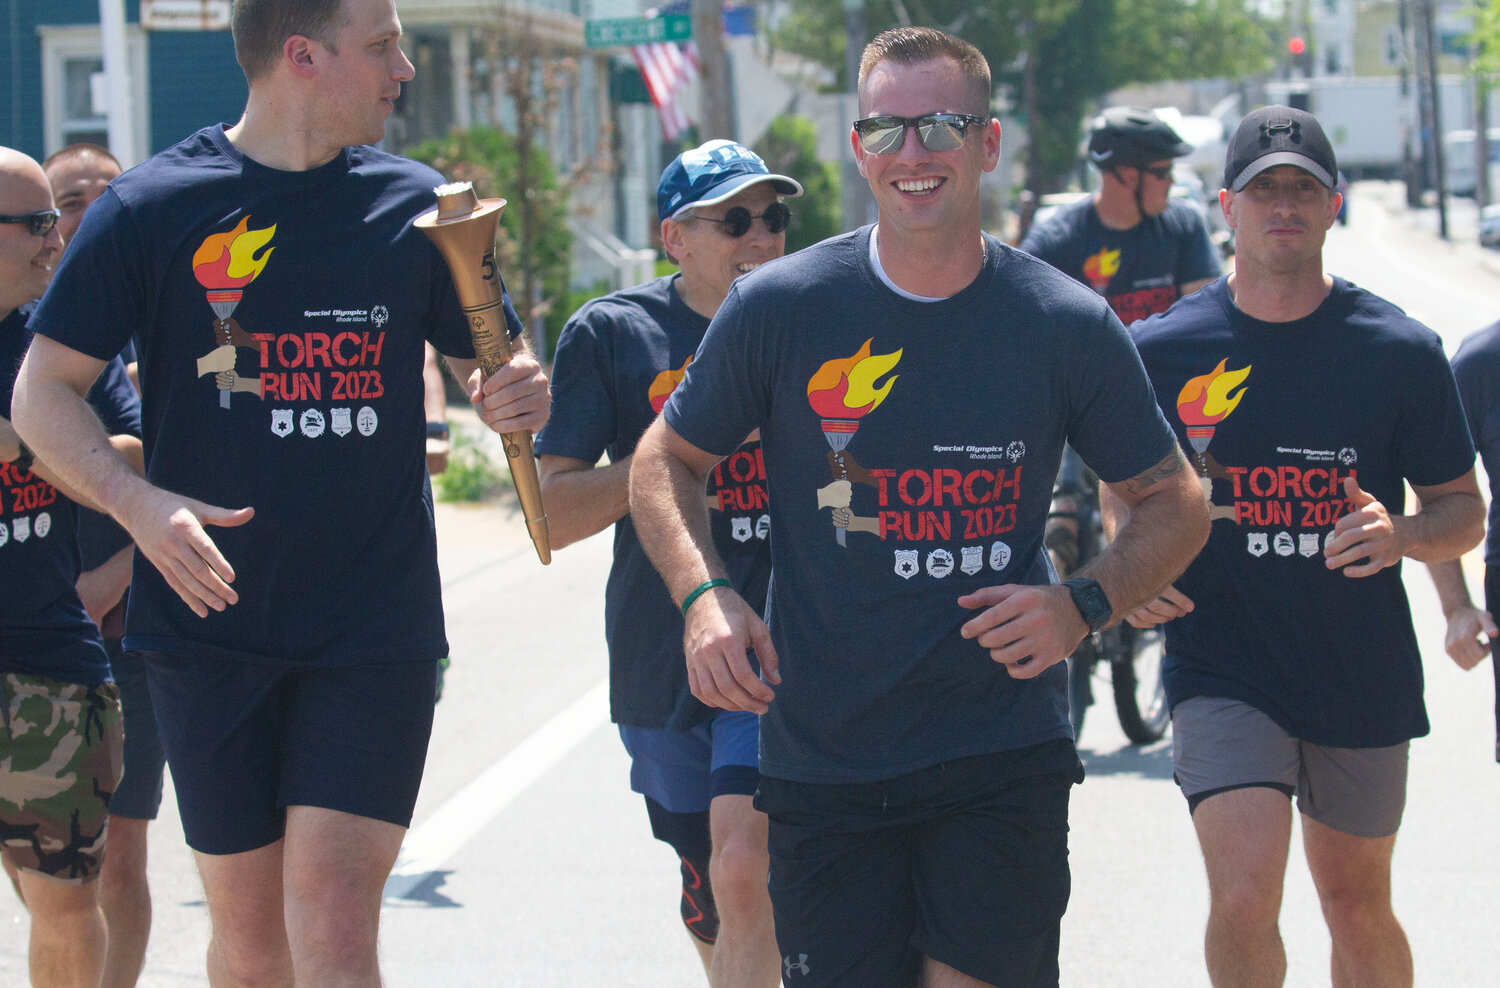 Barrington Police Officer Sean Murphy (left) carries the torch while running with other law enforcement members.